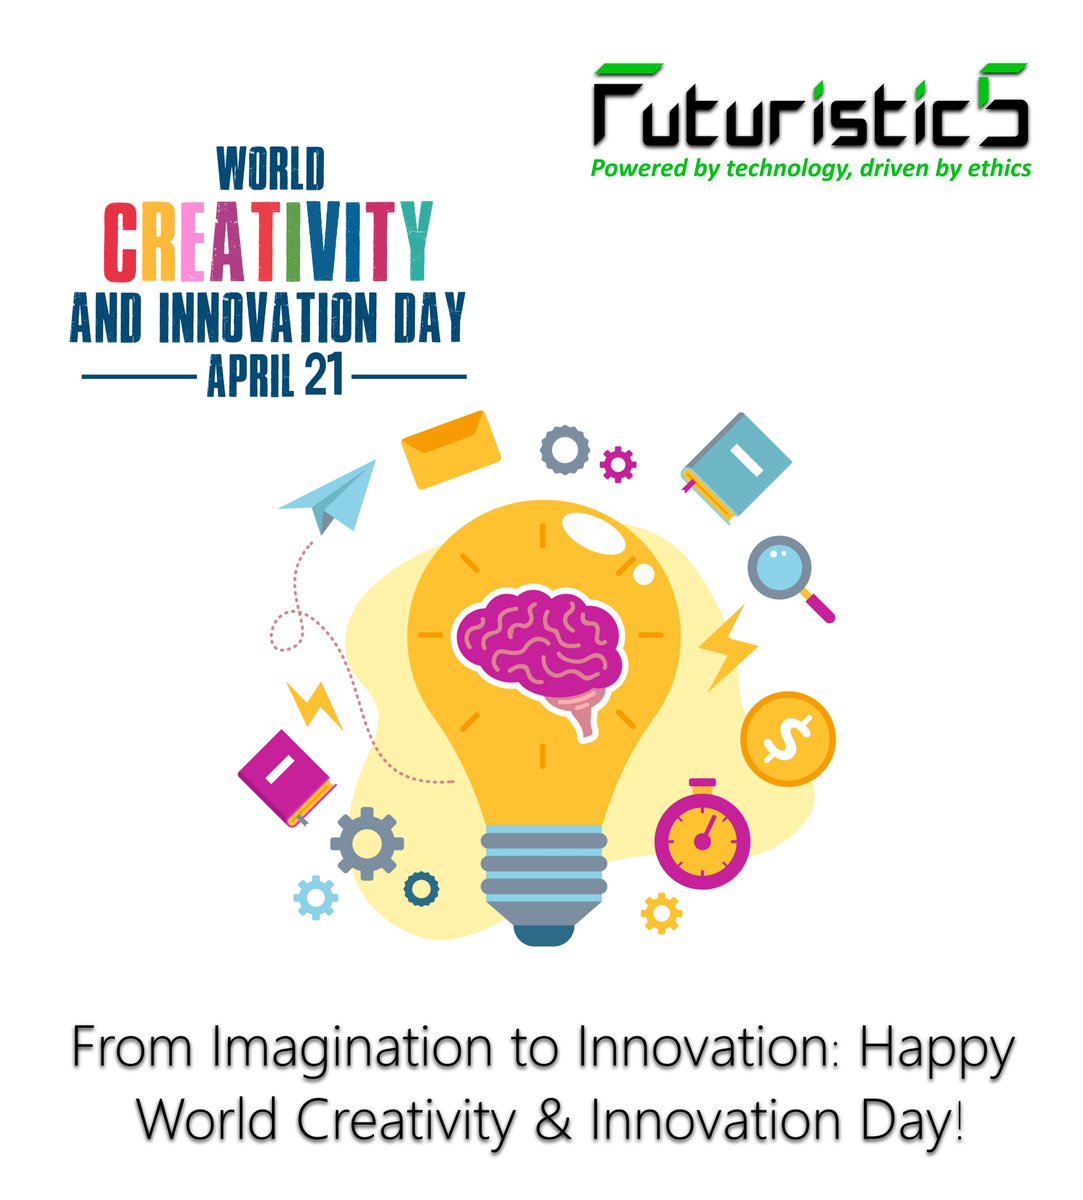 Happy #Innovation & #Creativity Day from all of us!🌟💻

Ready to bring your vision to life? Contact us and let's start creating together!

#TechInnovation #Inspiration #Technology #Futuristic5 #ITServices #ServiceProvider #InformationTechnology #India #Pune #Technology #Design